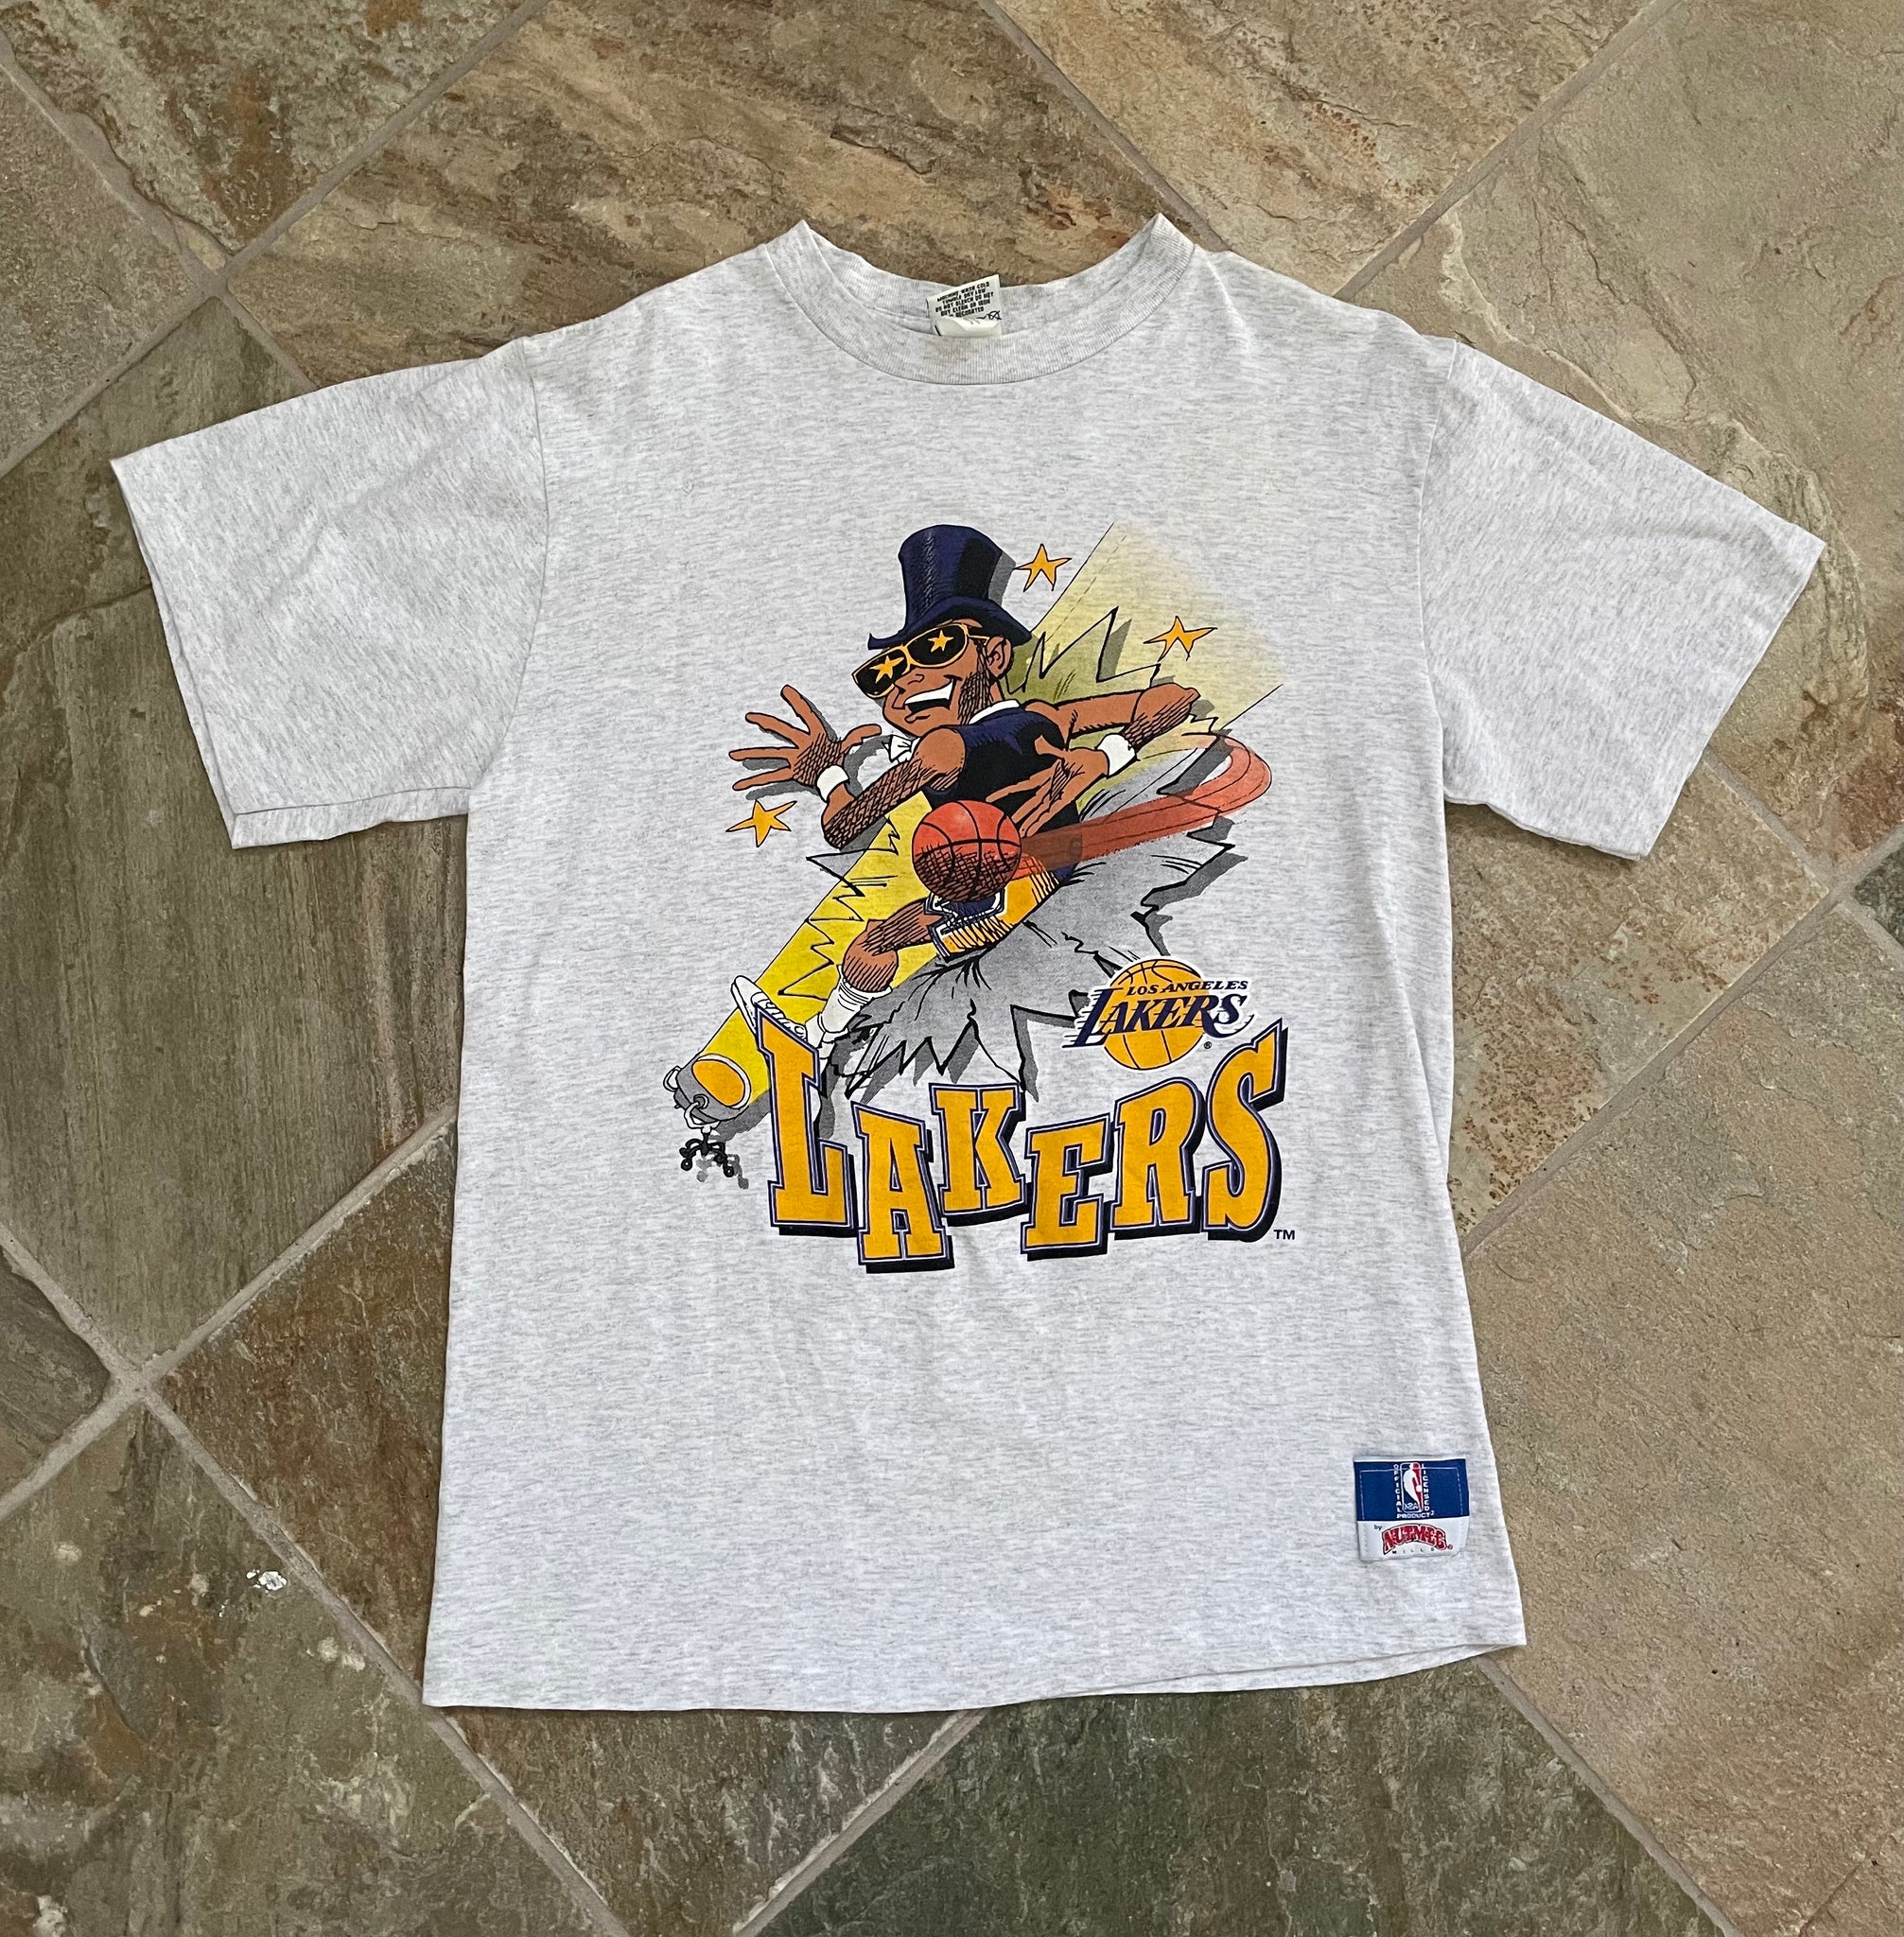 Sports / College Vintage NBA All Over Print Magic Johnson Los Angeles Lakers Tee Shirt 1990s XL